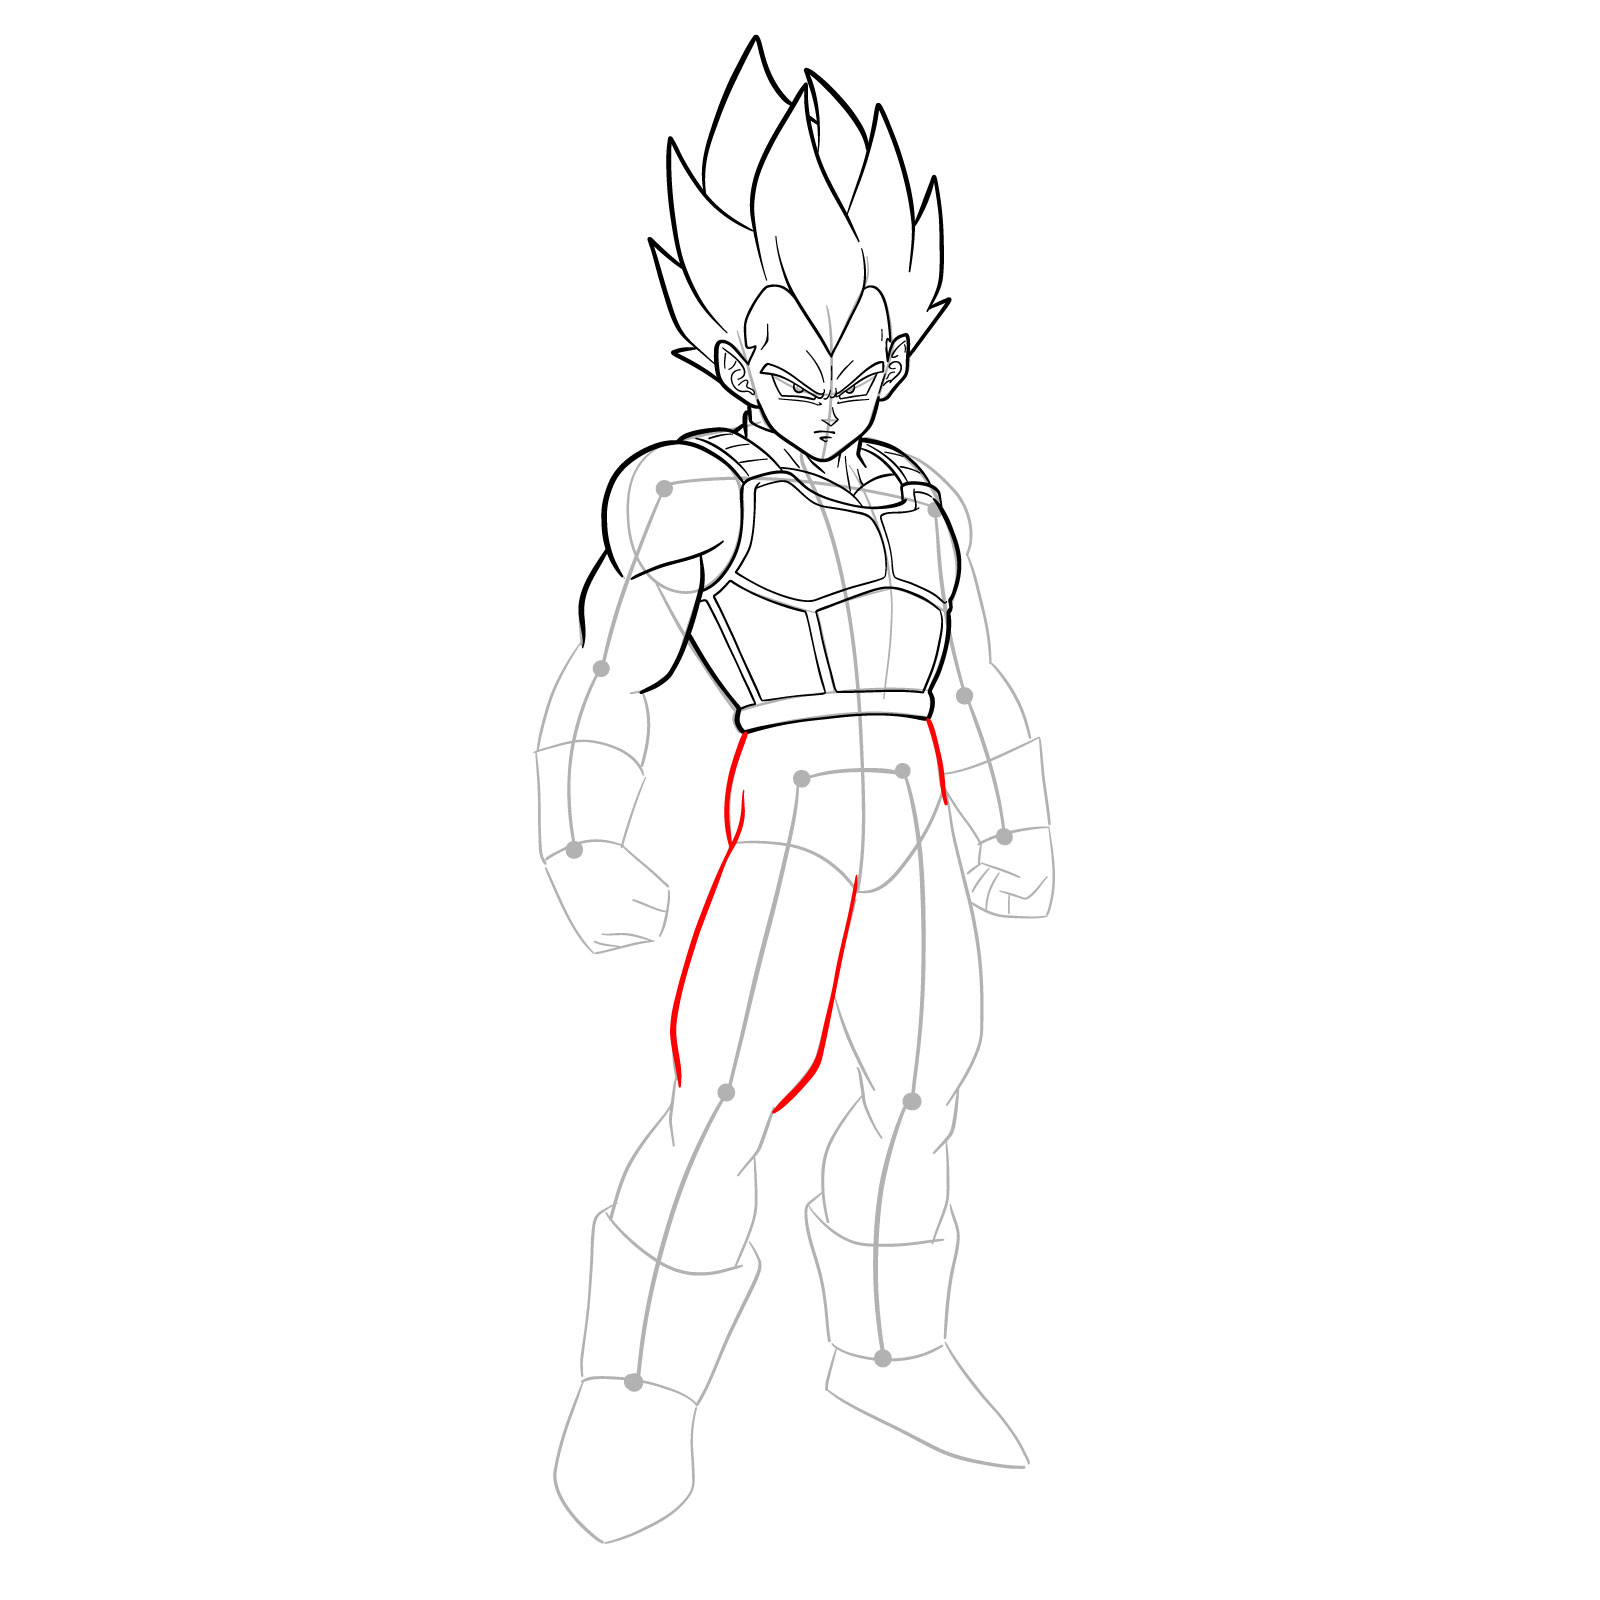 How to draw Vegeta in SSGSS - step 25